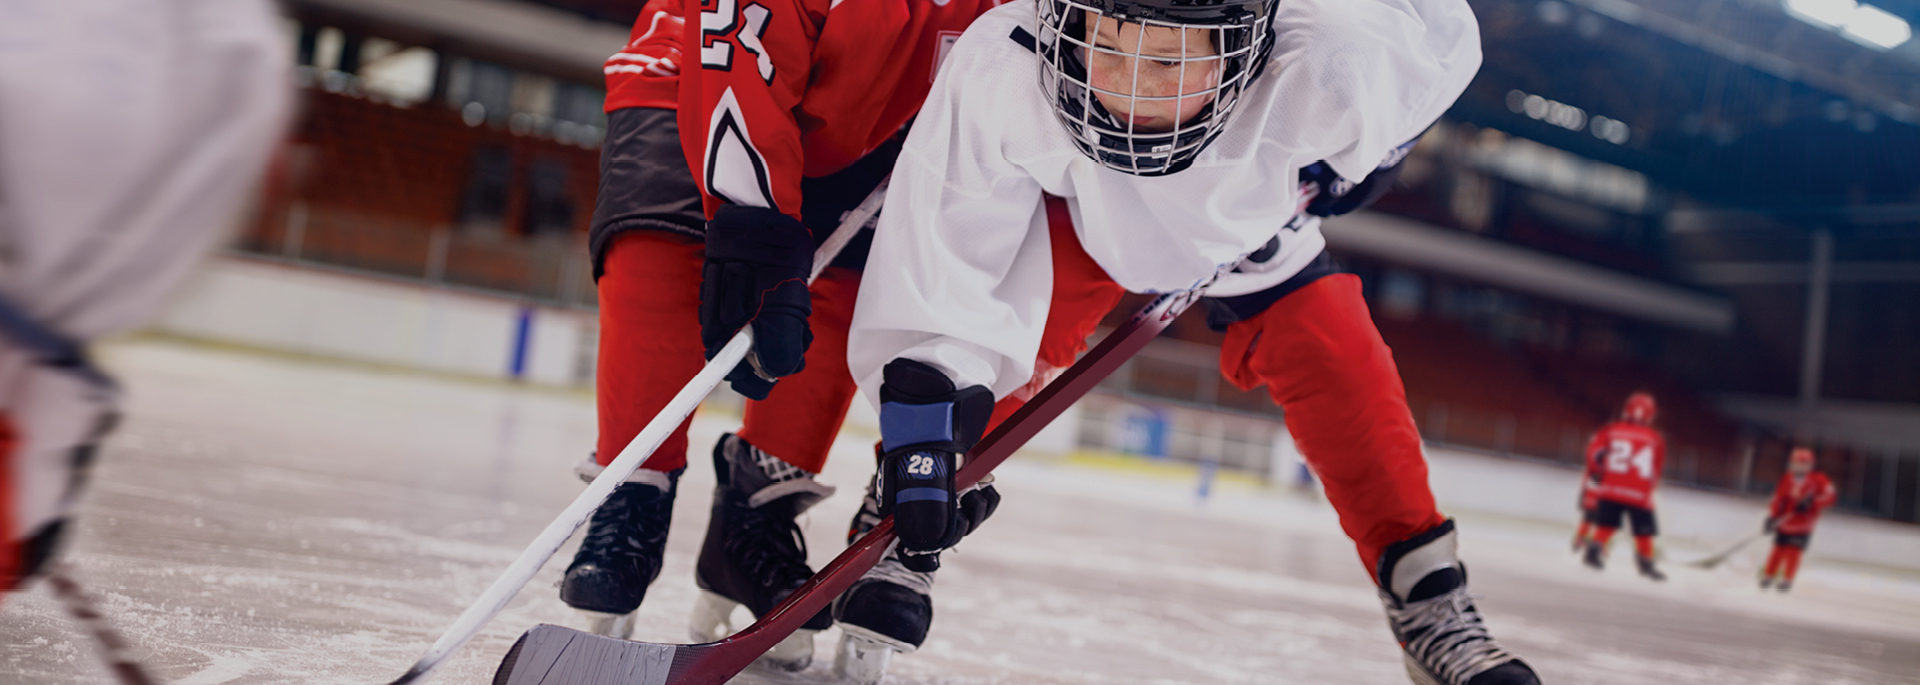 child in white jersey and hockey gear holding stick 